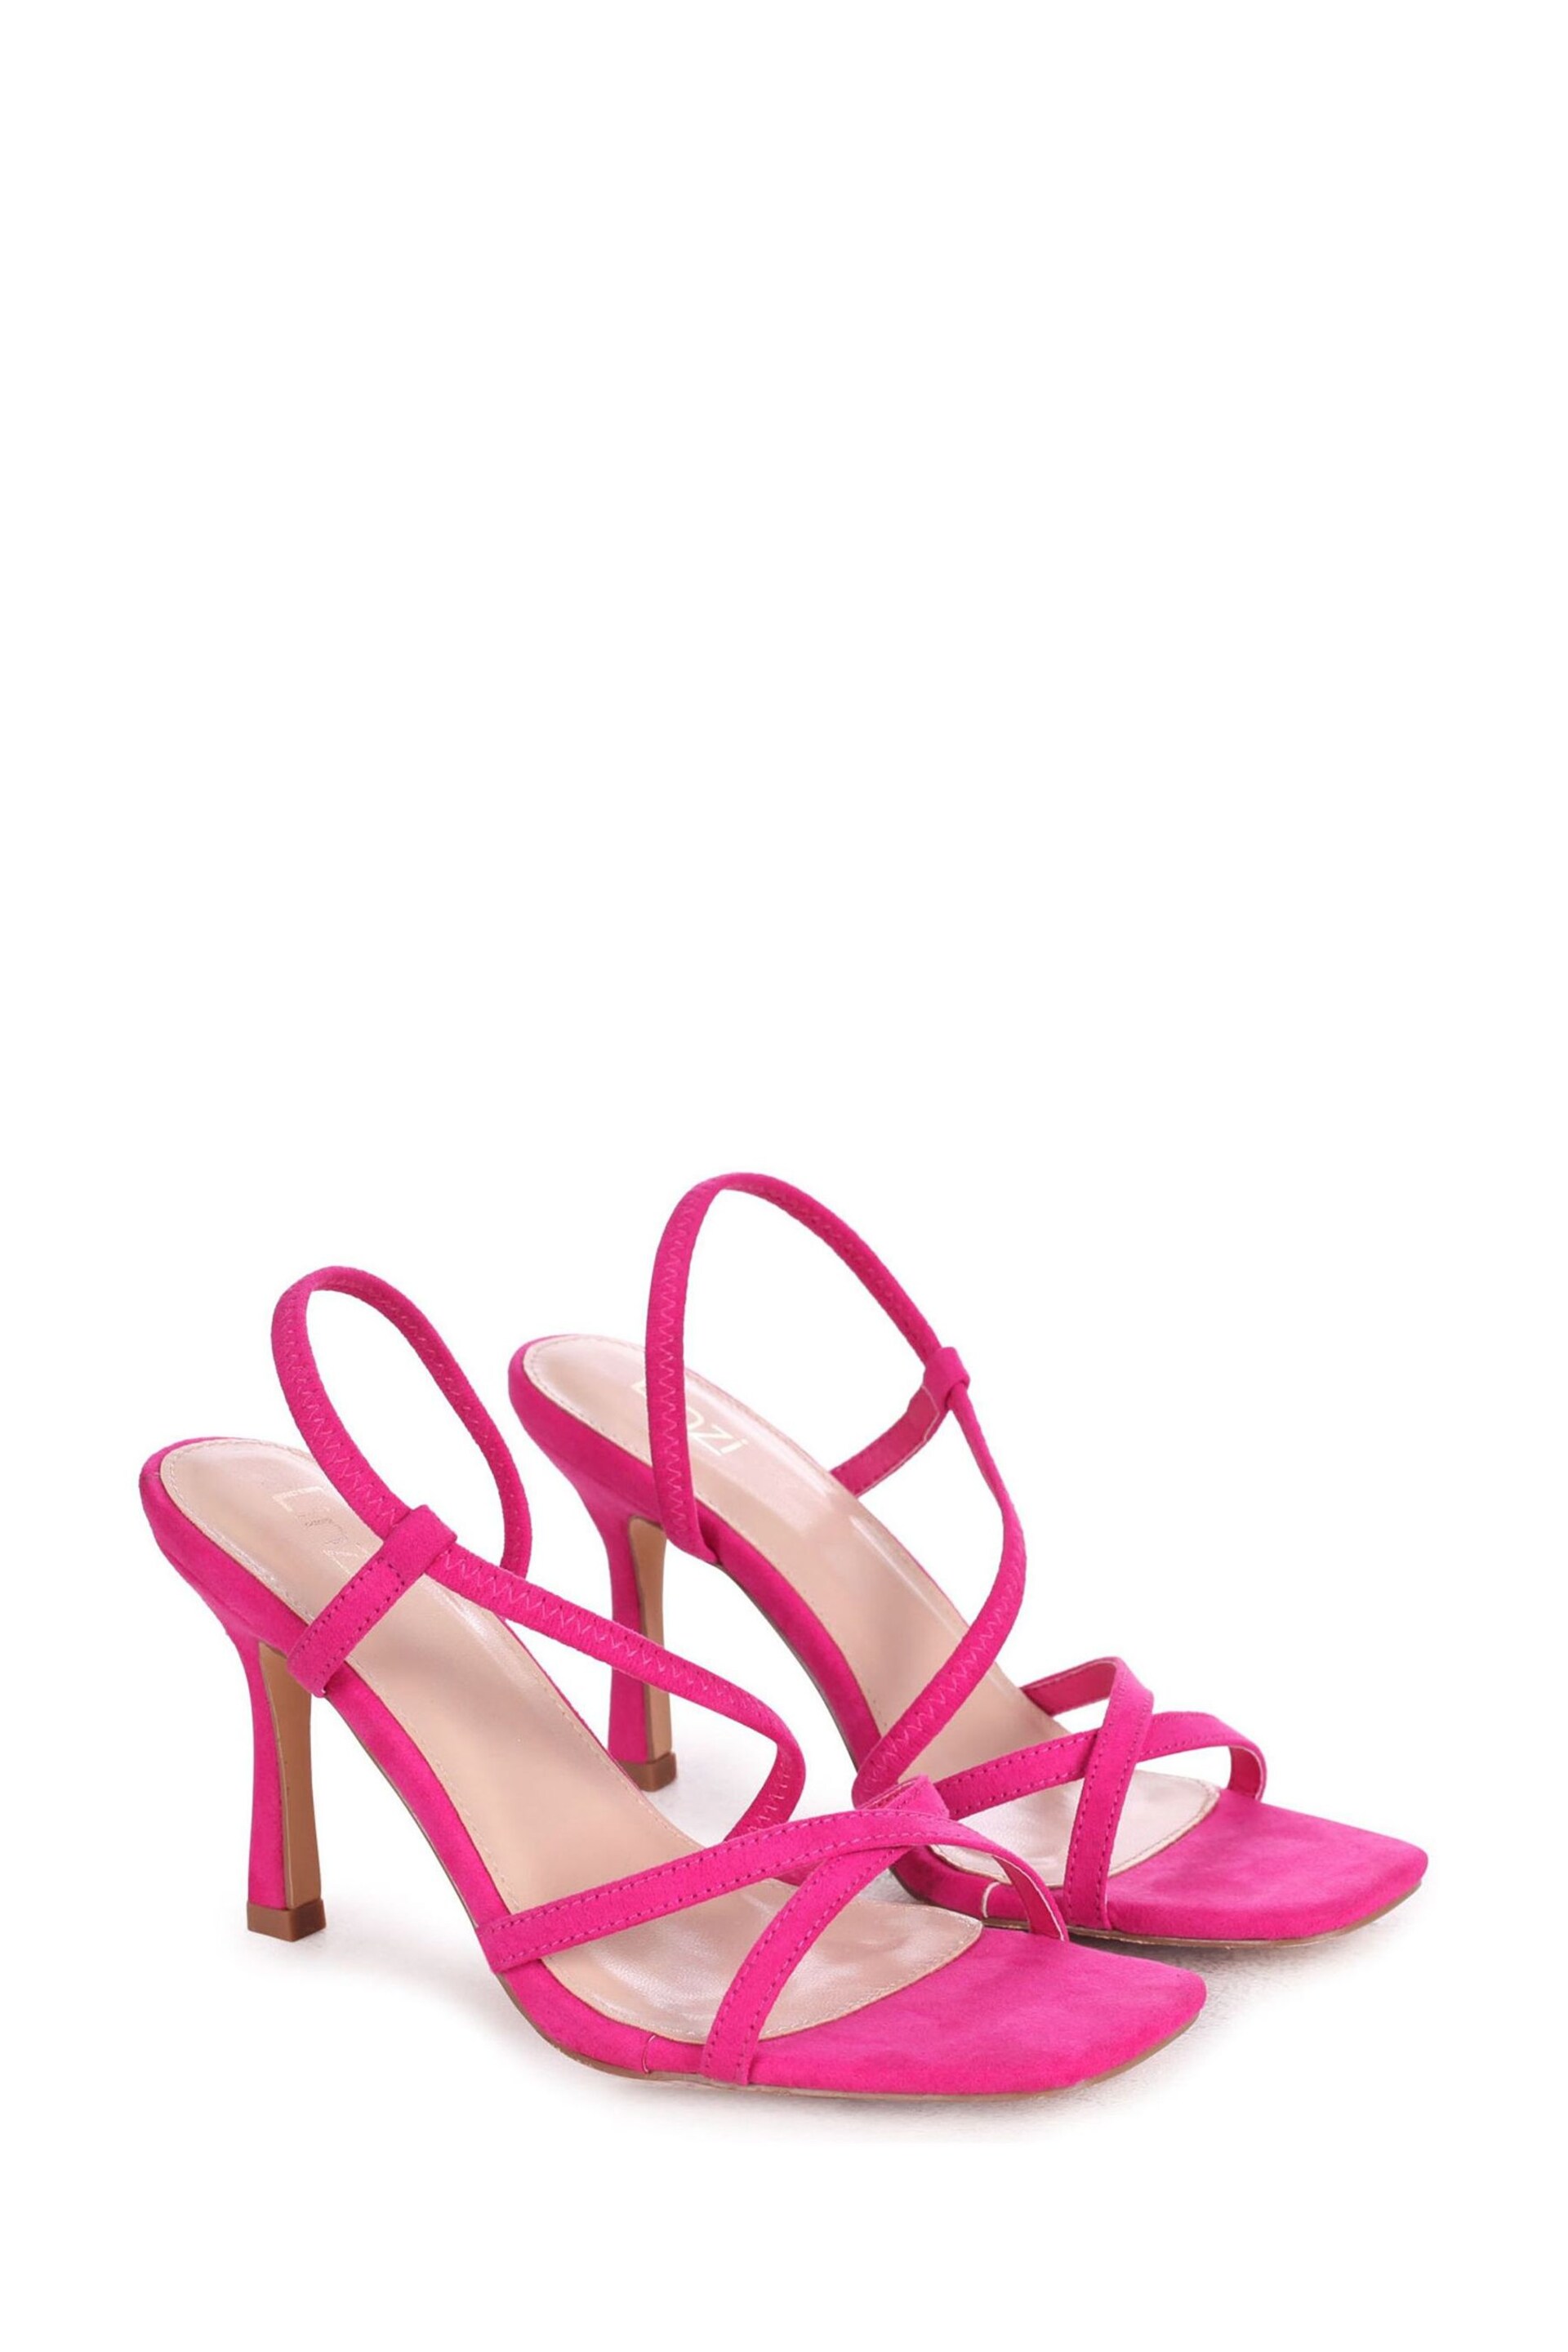 Linzi Pink Silvie Faux Suede Strappy Heeled Sandals - Image 3 of 4